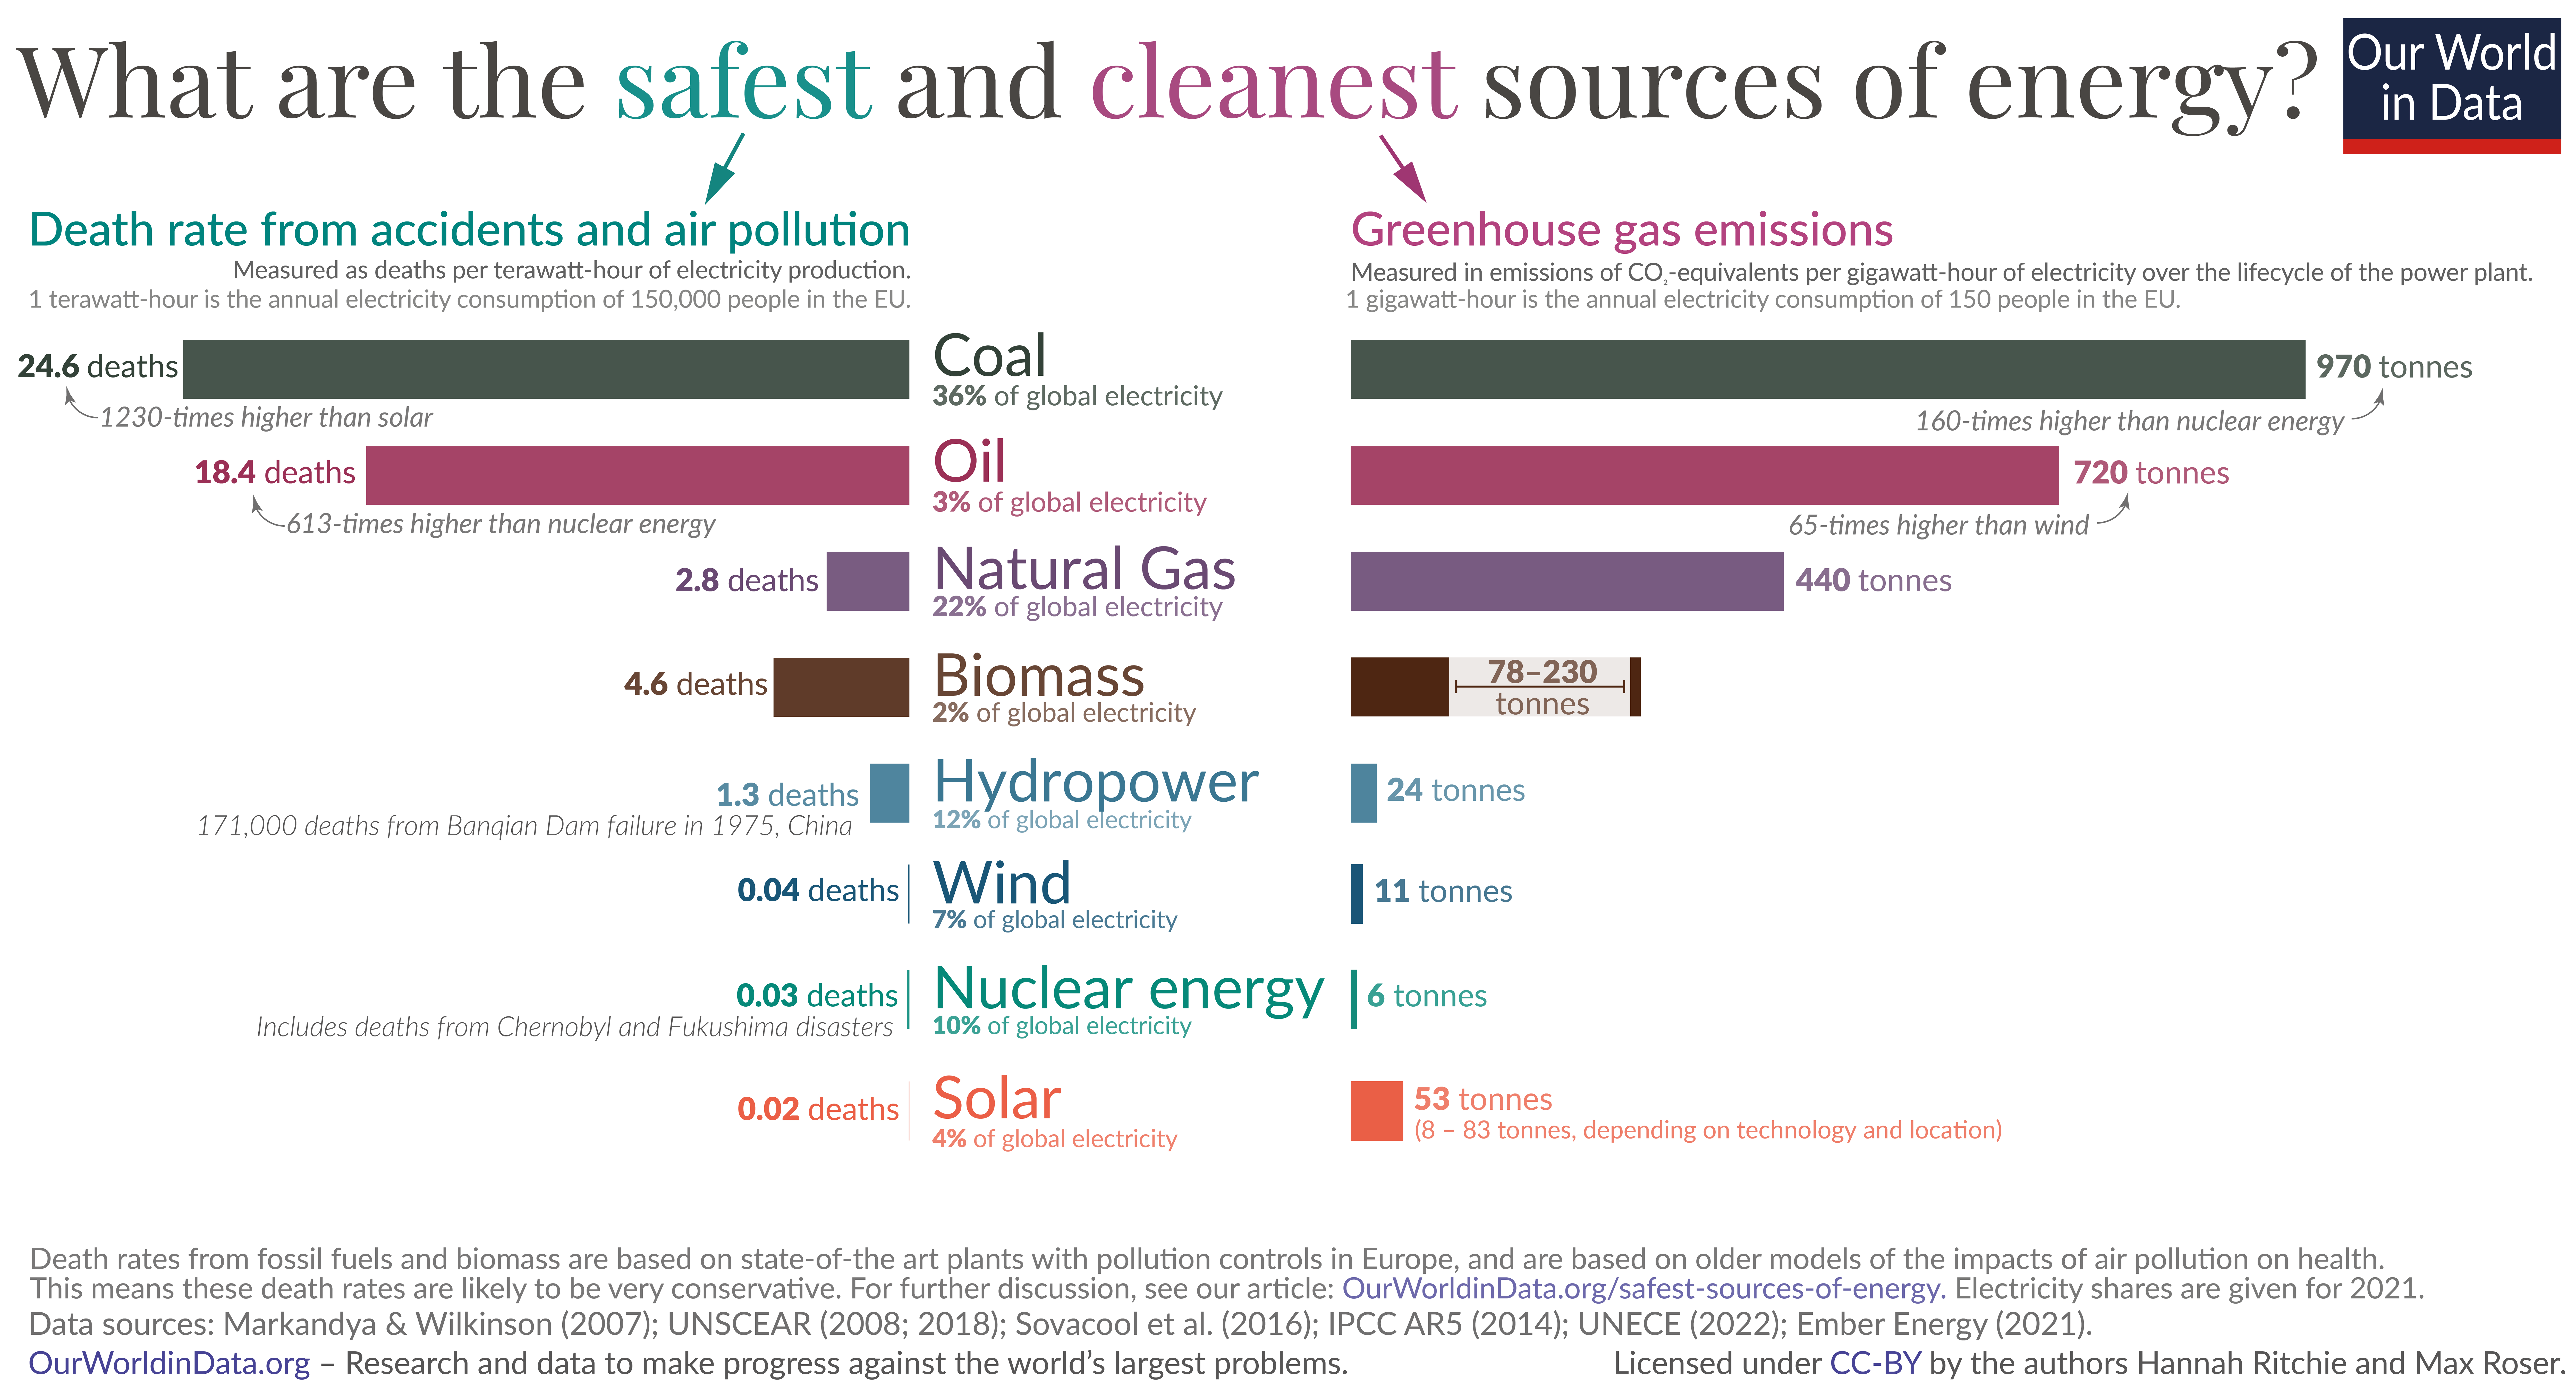 Bar charts showing death rates and carbon emissions from electricity sources.